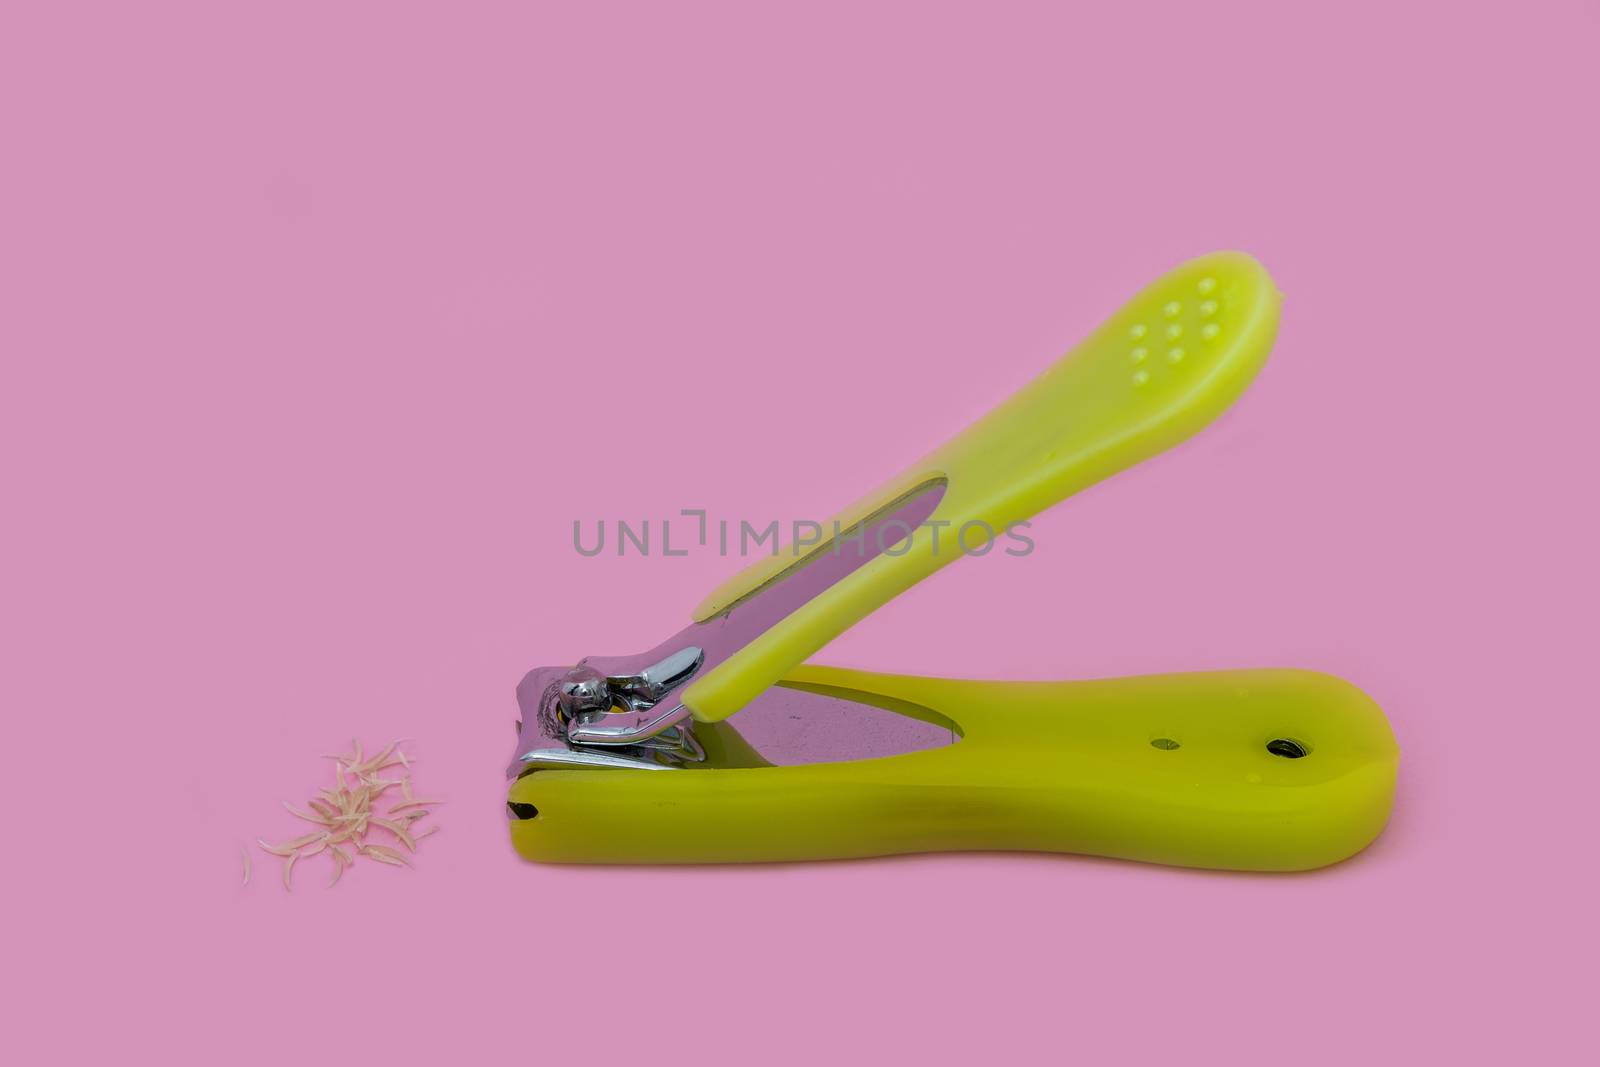 A Stainless Steel with green plastic handle Nail Clippers and some nails isolated on pink background.